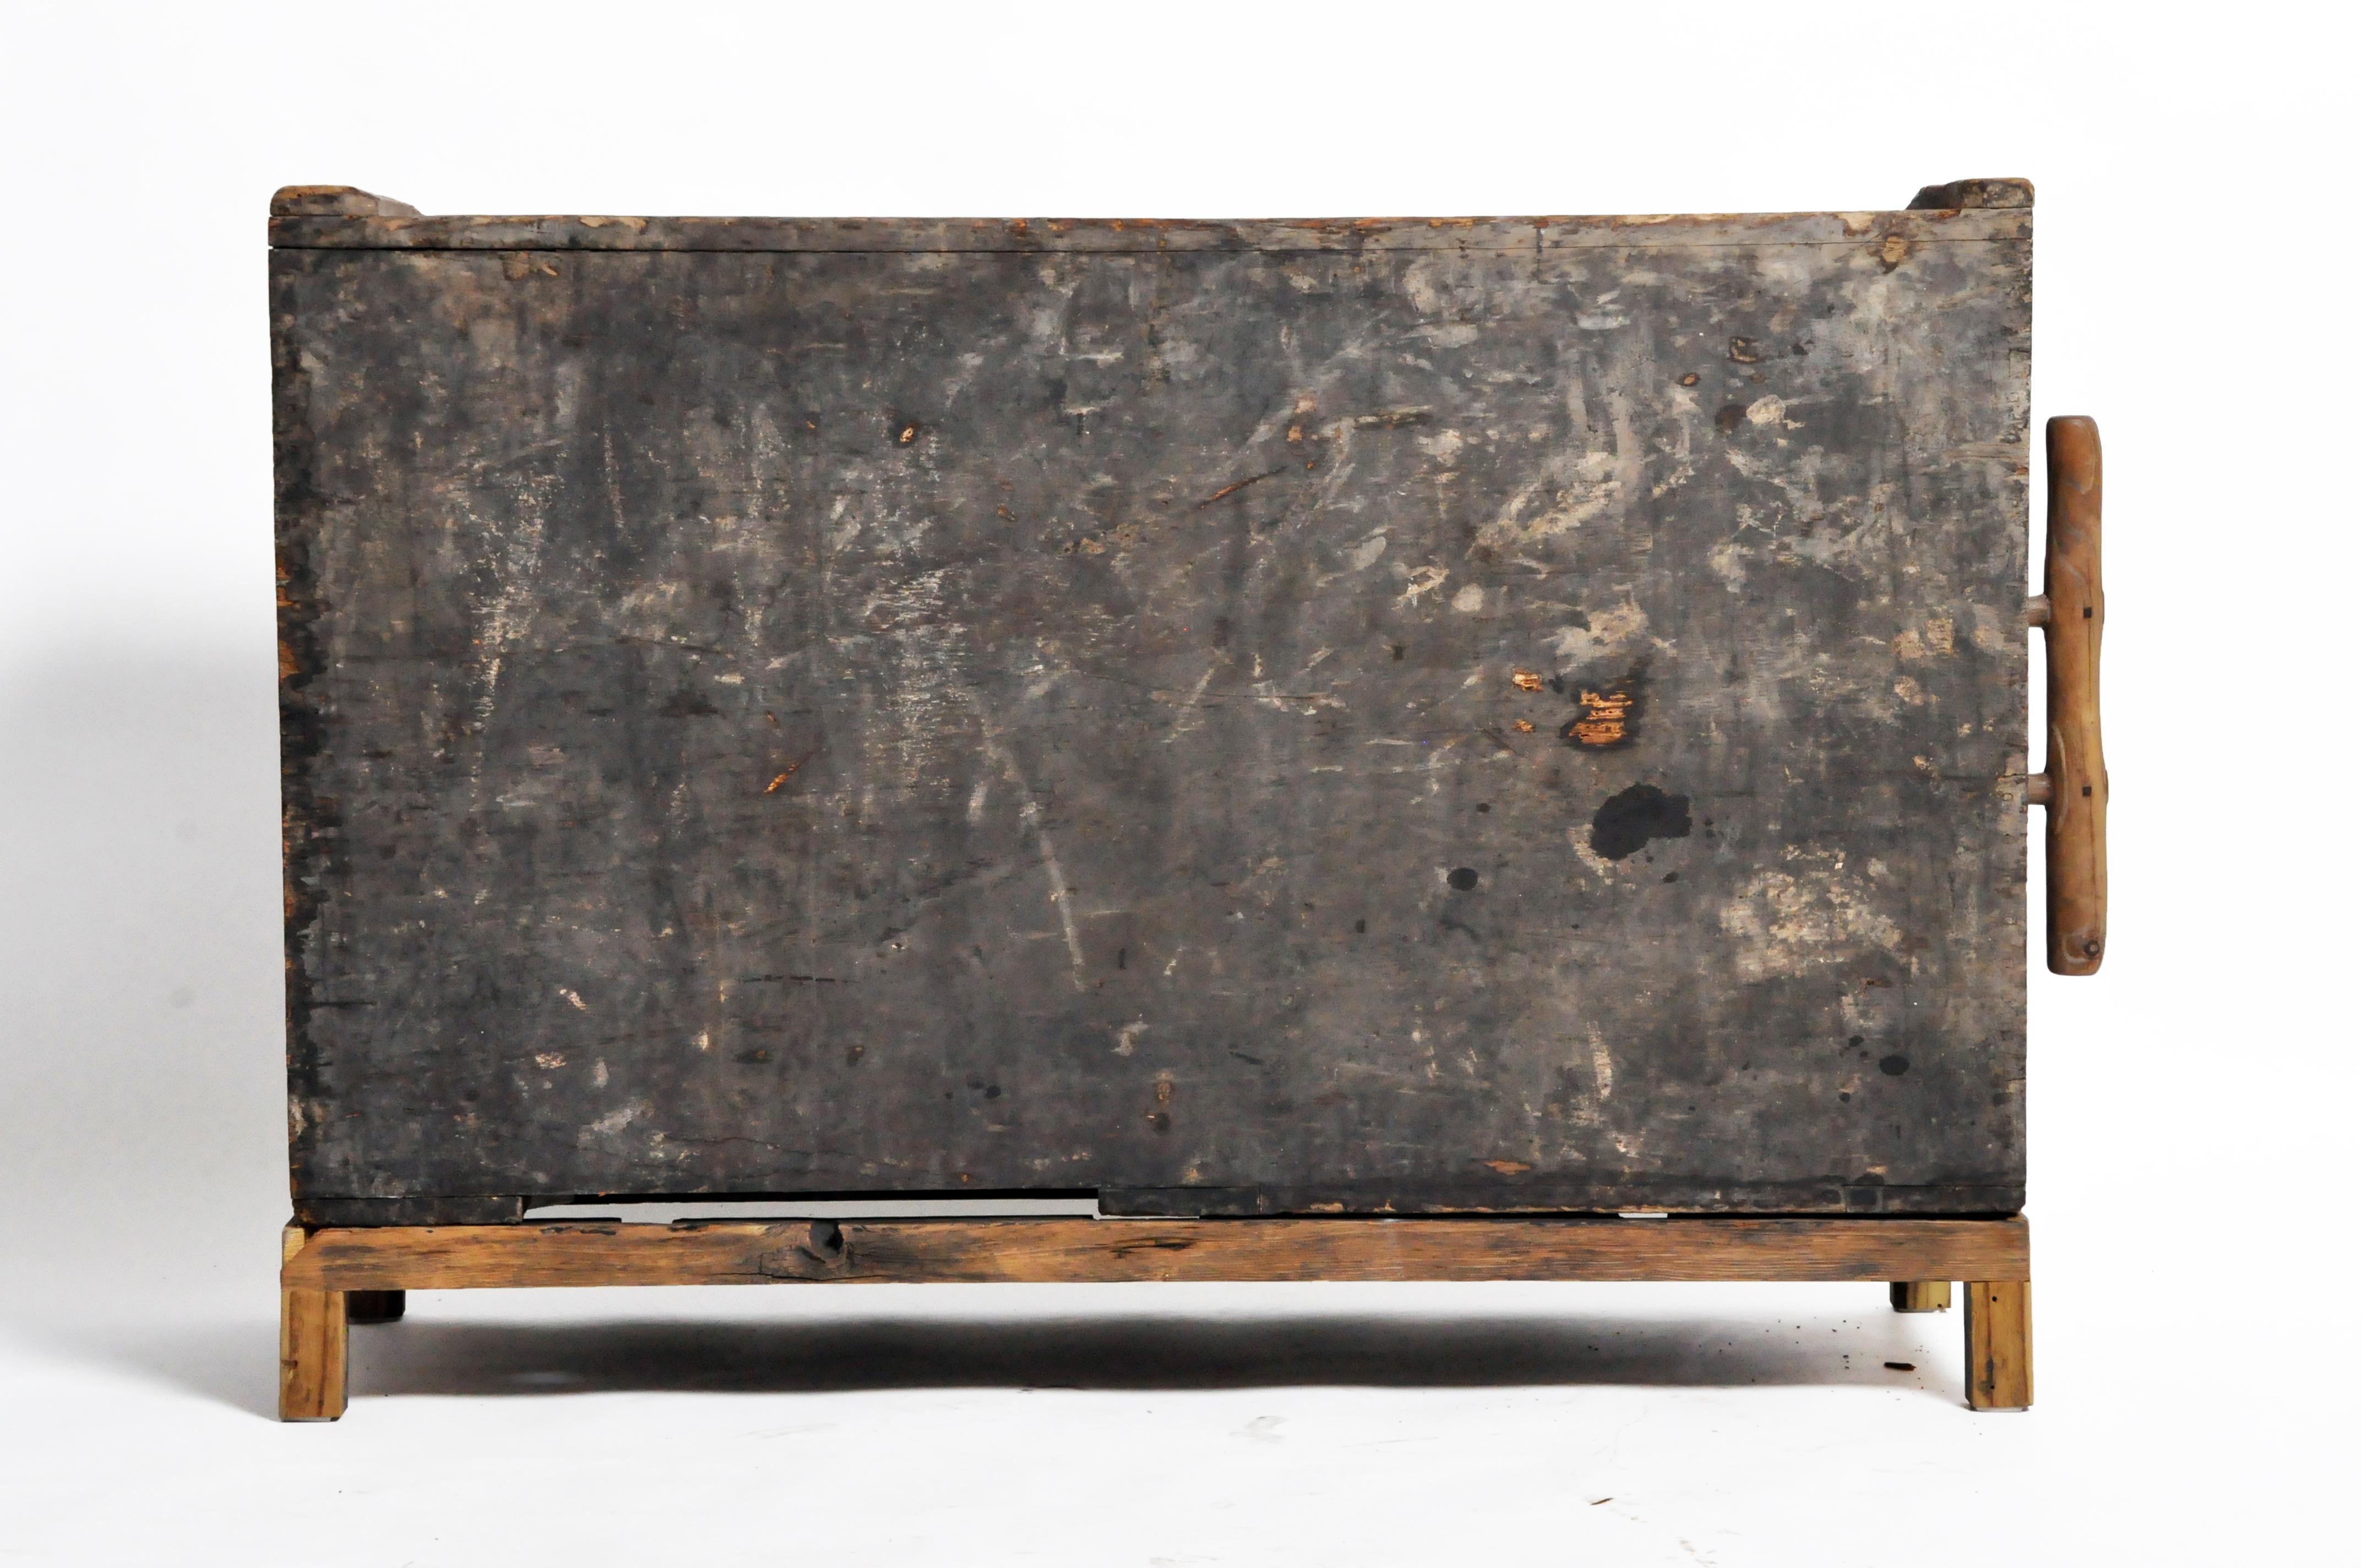 Antique box bellows from China made from wood and finished in black lacquer.  Over extended use, the piece has developed a rich gray patina.   It has been fitted with a modern stand made from reclaimed wood. 